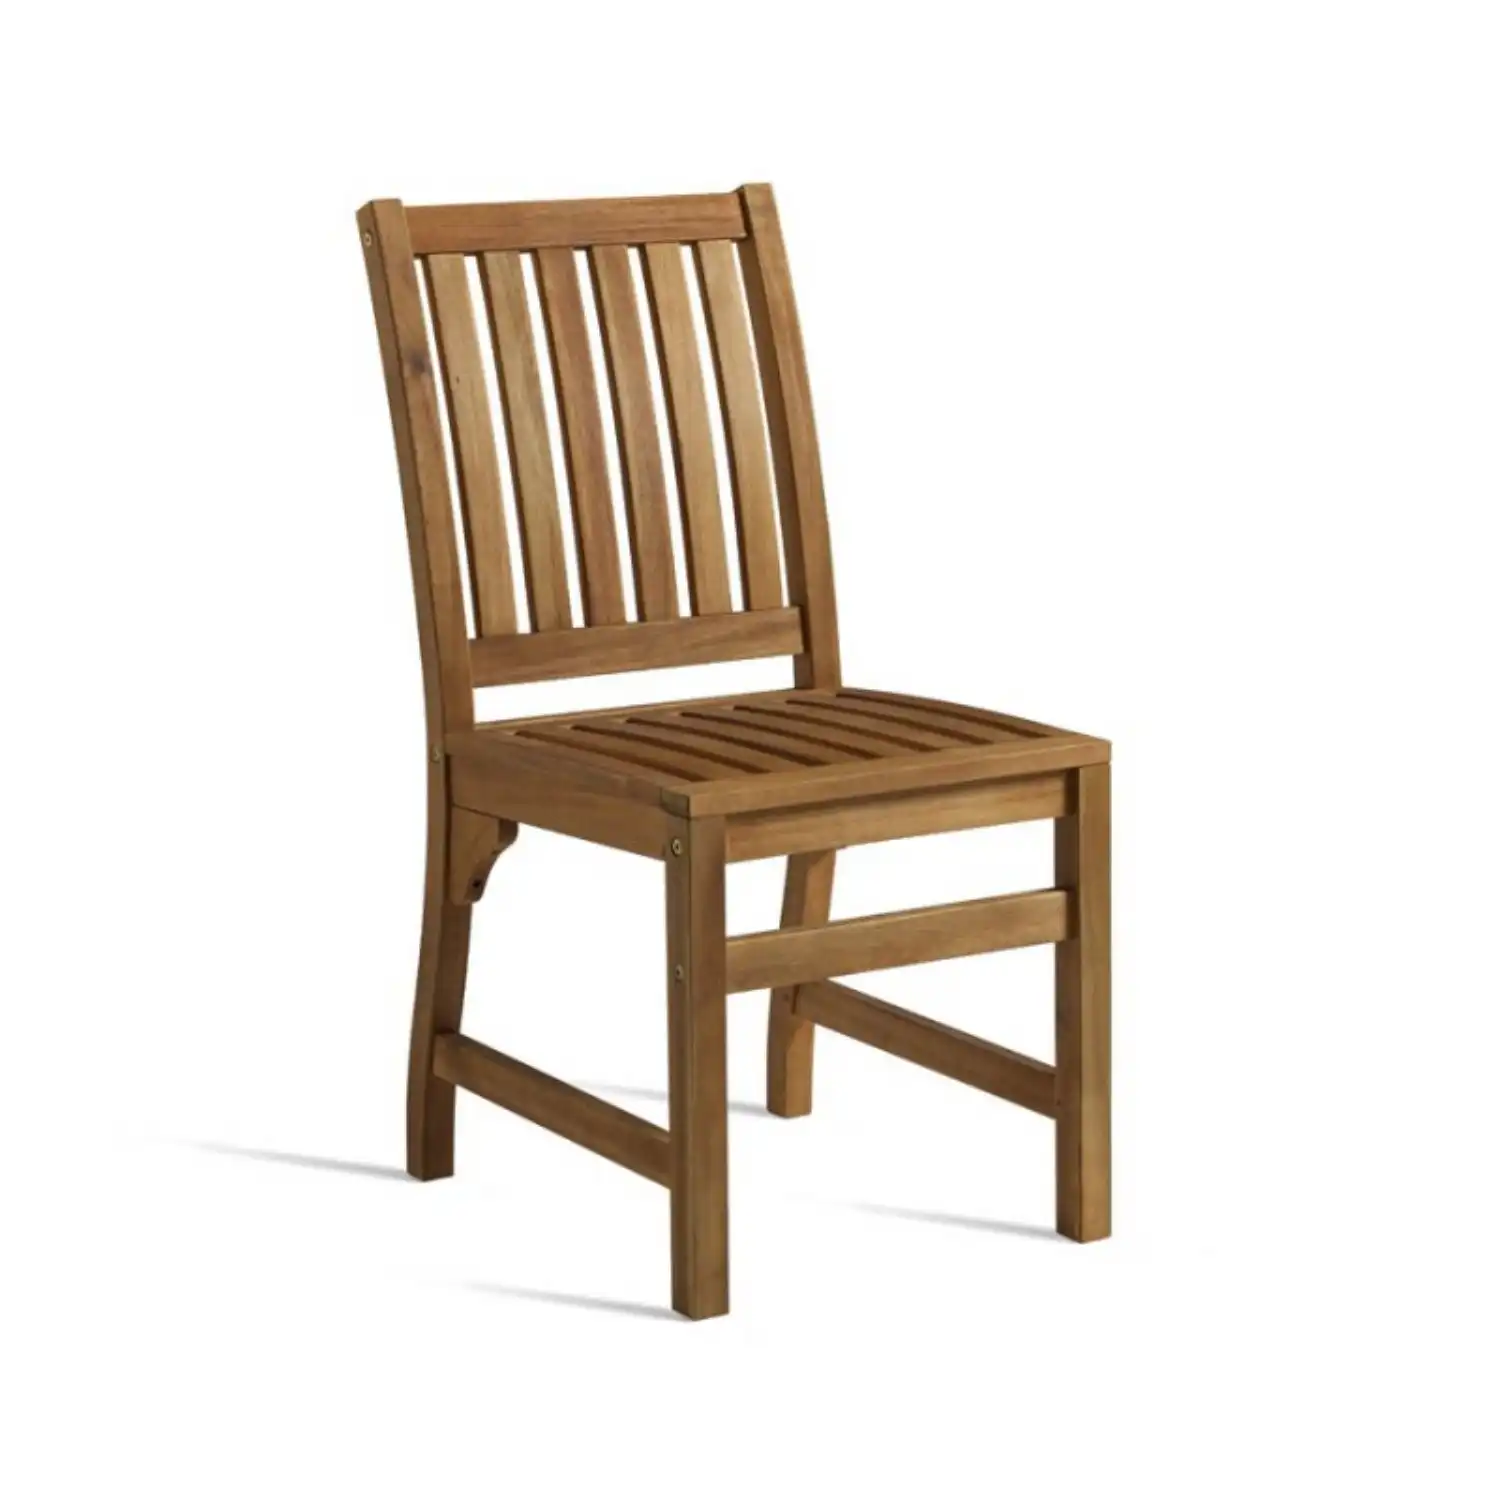 Solid Acacia Dining Chair Outdoor